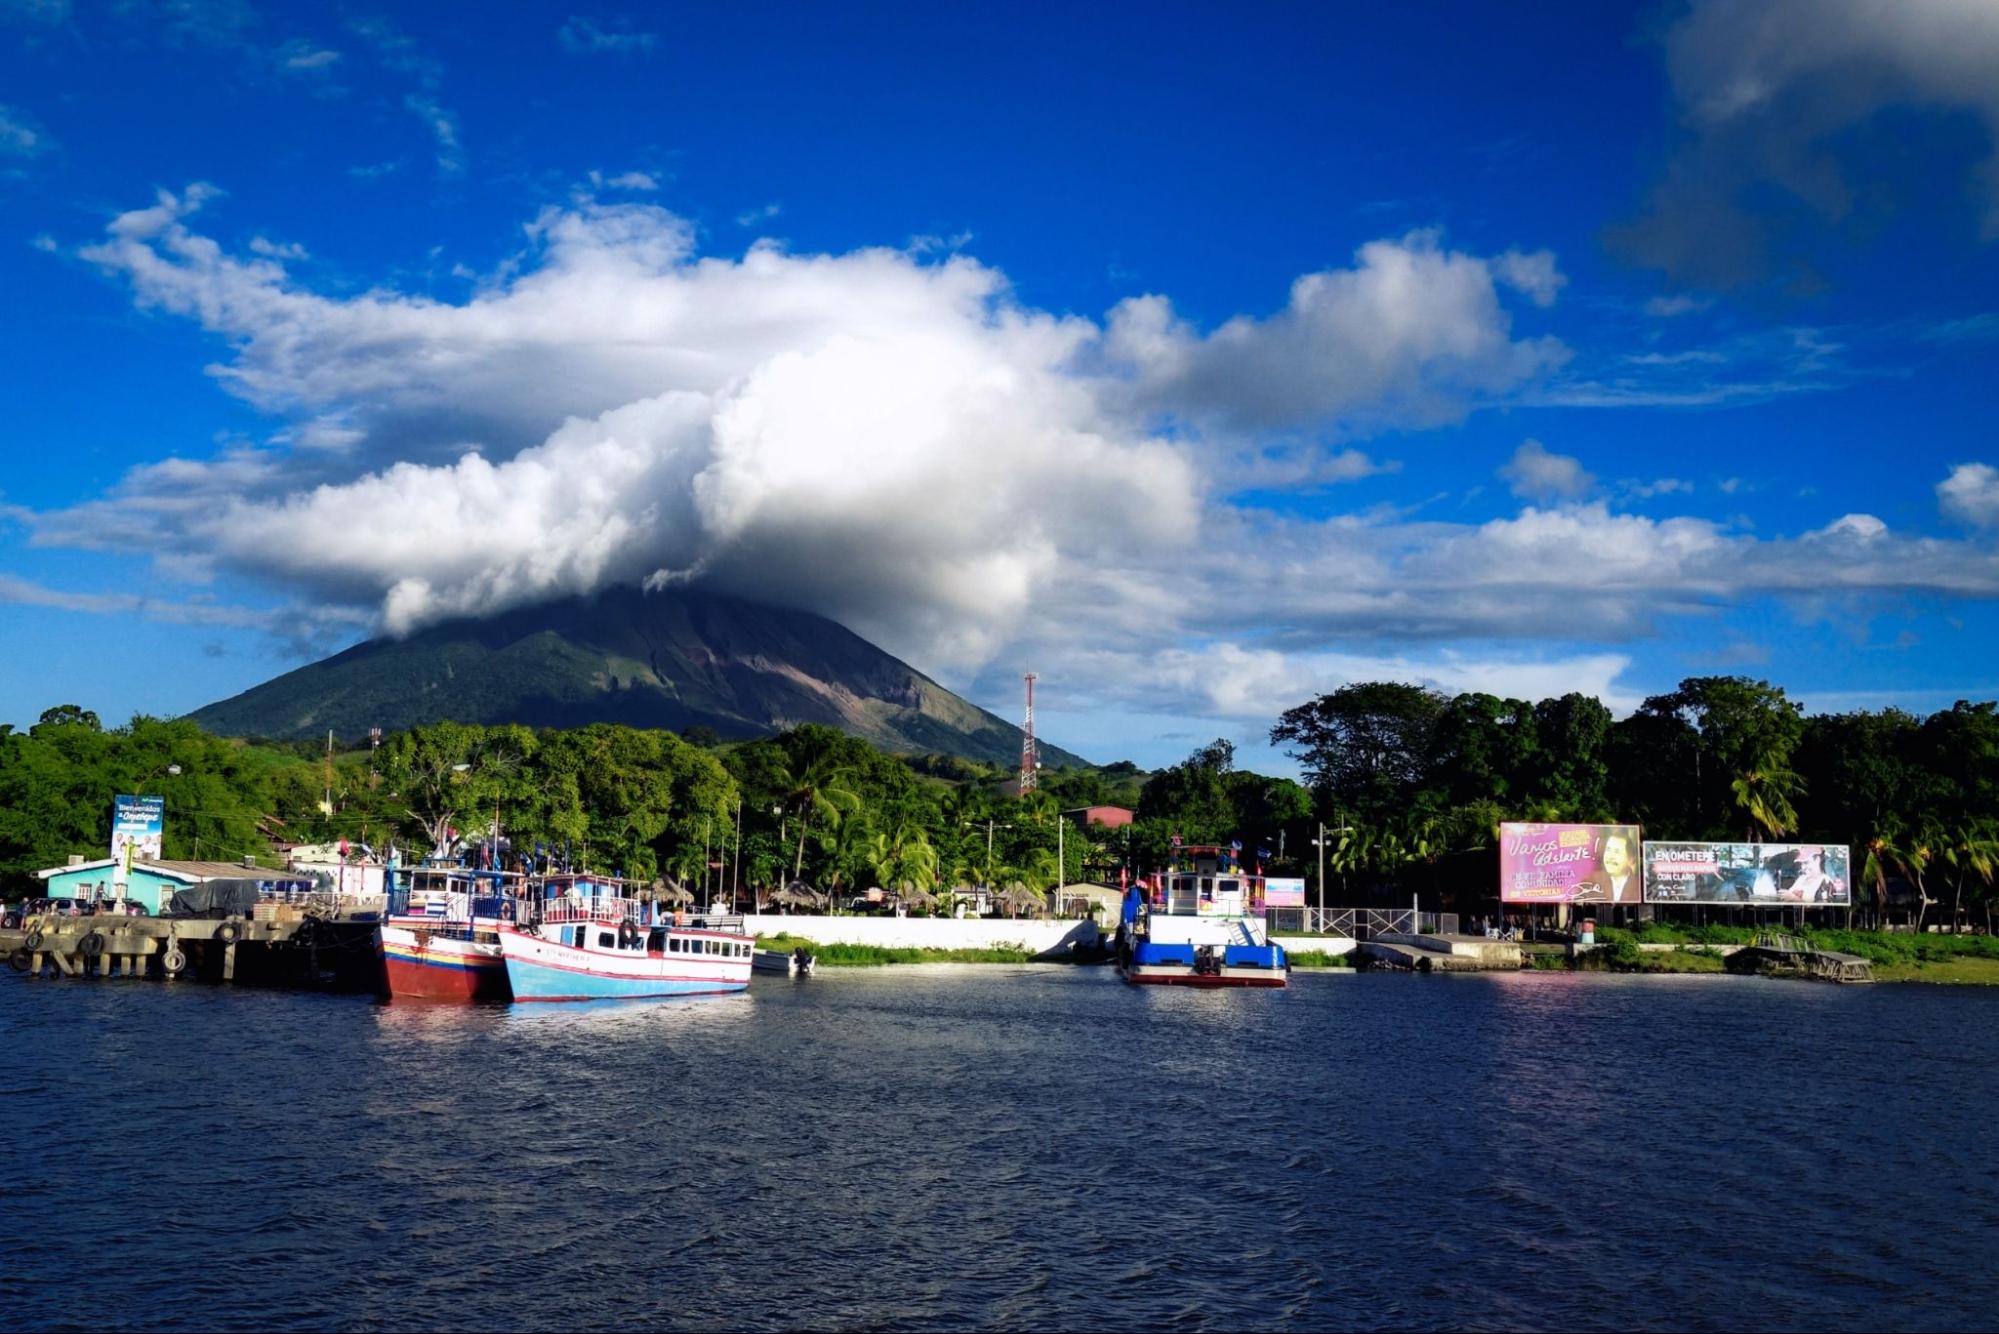 Moyogalpa port on Ometepe Island in Lake Nicaragua with fishing boats and cloud-topped Concepcion volcano in the background